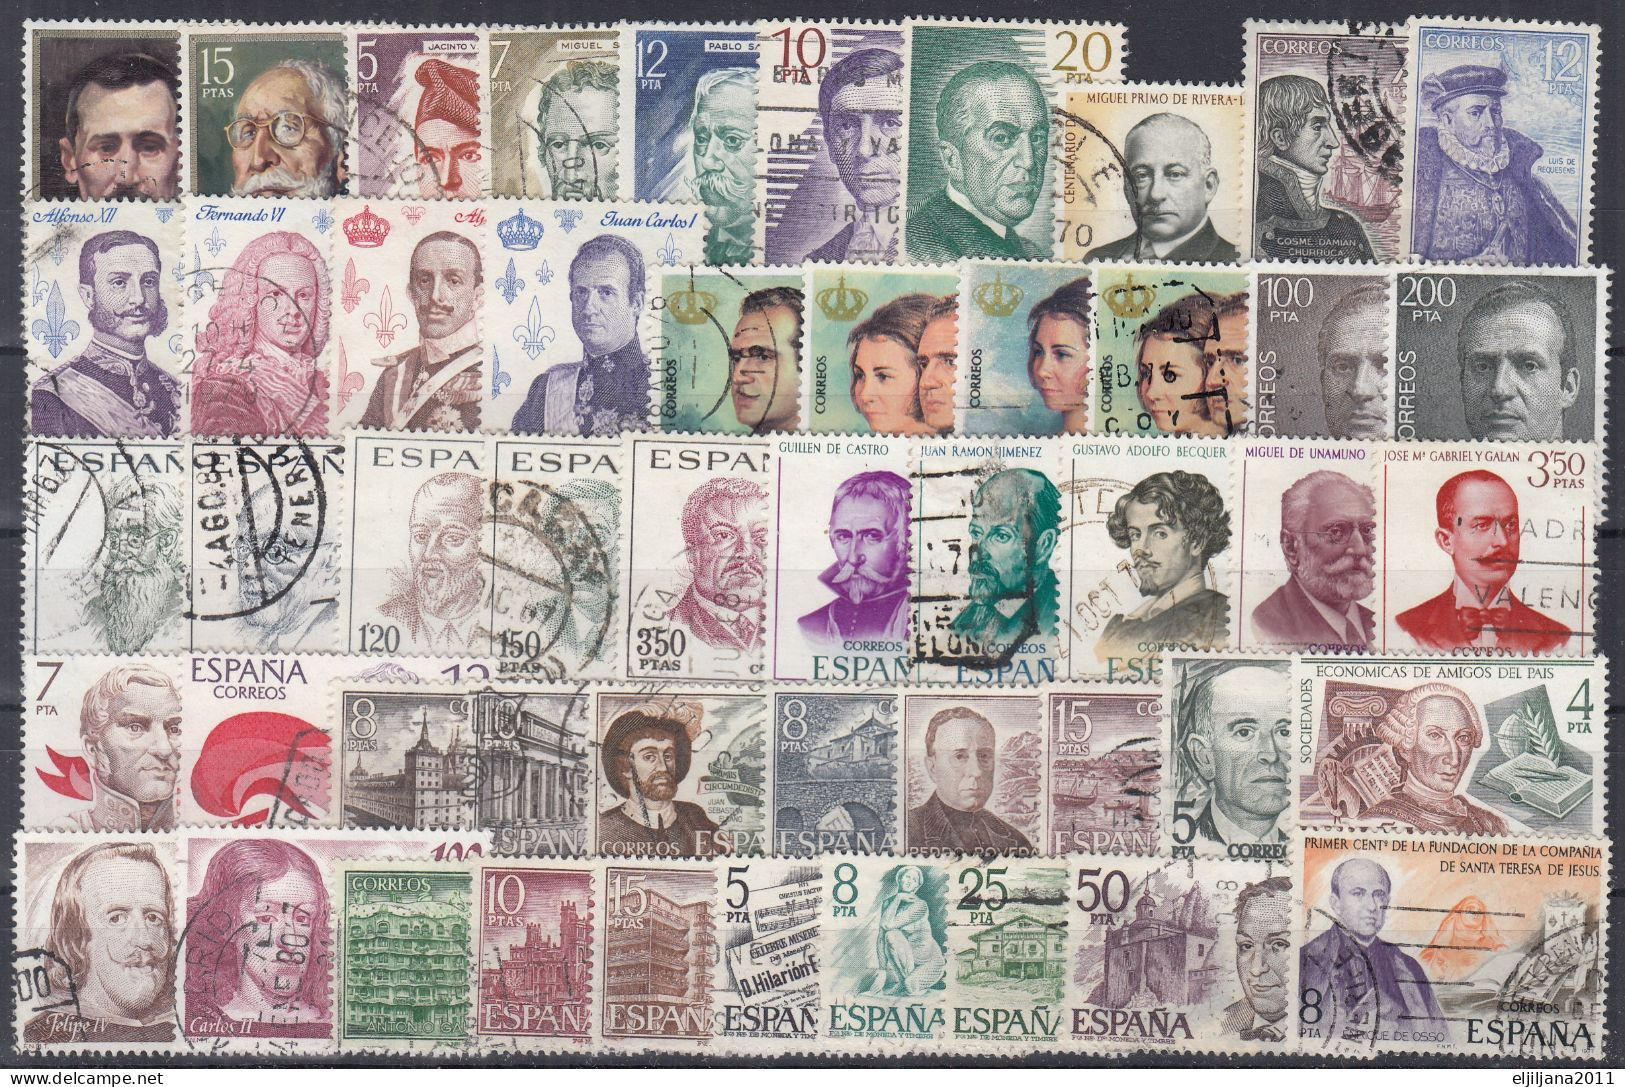 Action !! SALE !! 50 % OFF !! ⁕ SPAIN 1968 - 1981 ESPANA ⁕ Famous People ⁕ 50v Used - See All Scan - Colecciones